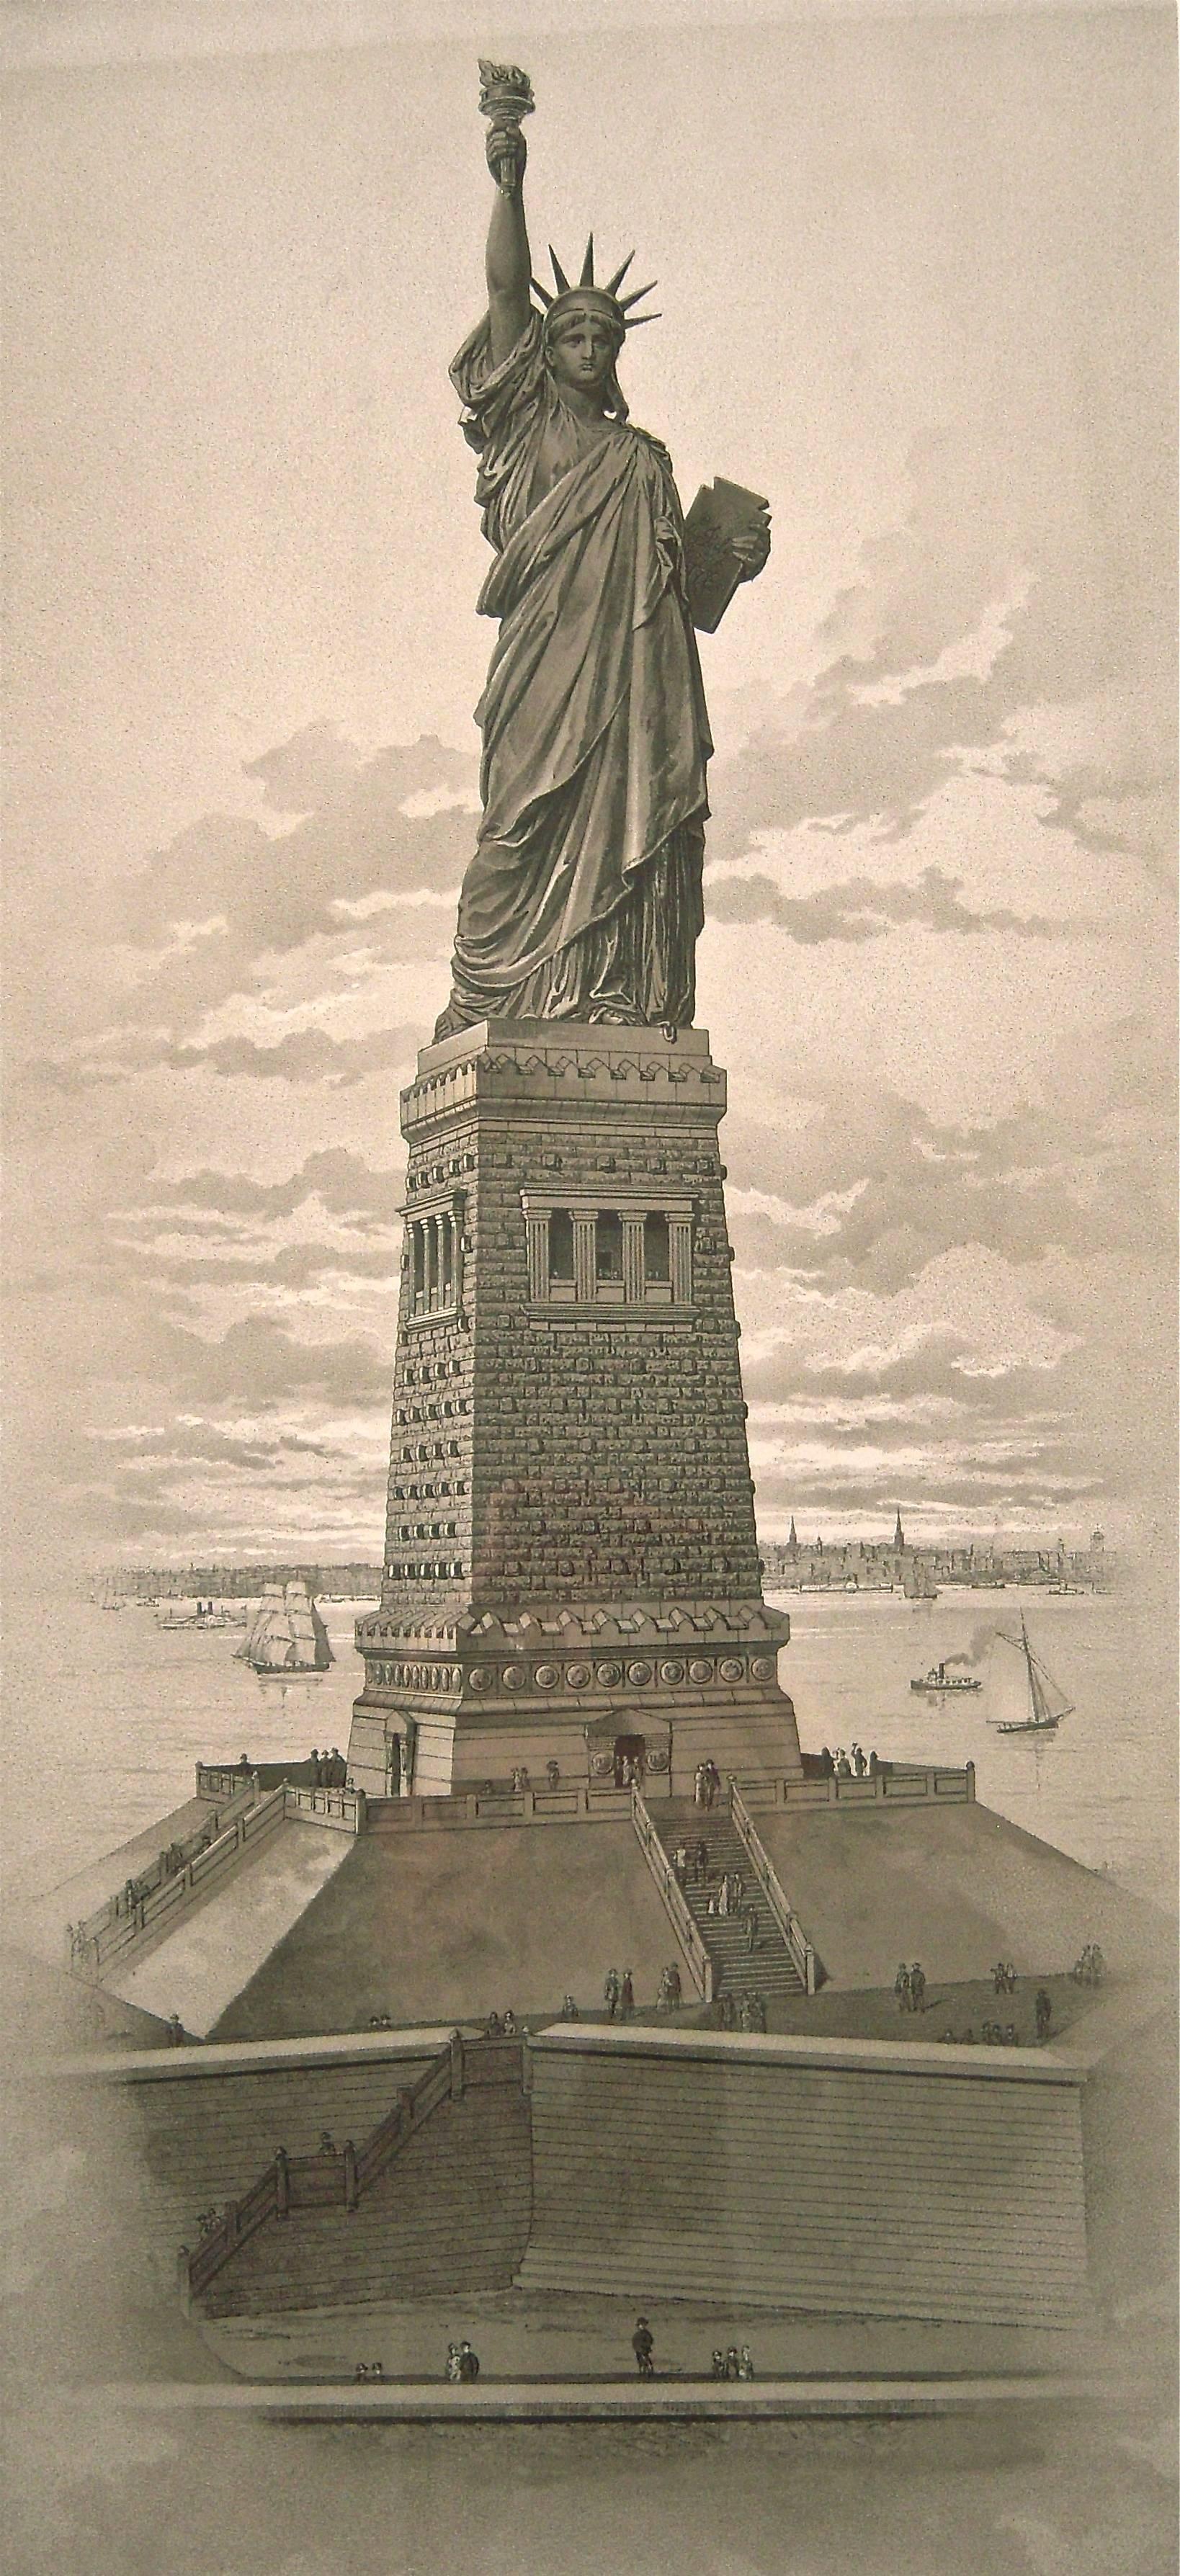 A lithograph print of the Statue of Liberty by Root and Tinker, circa 1883, newly, archivally matted and framed in a silver and black frame.
Root & Tinker generally employed Buek & Lindner, 65 Warren Street, New York, as the lithographer of its